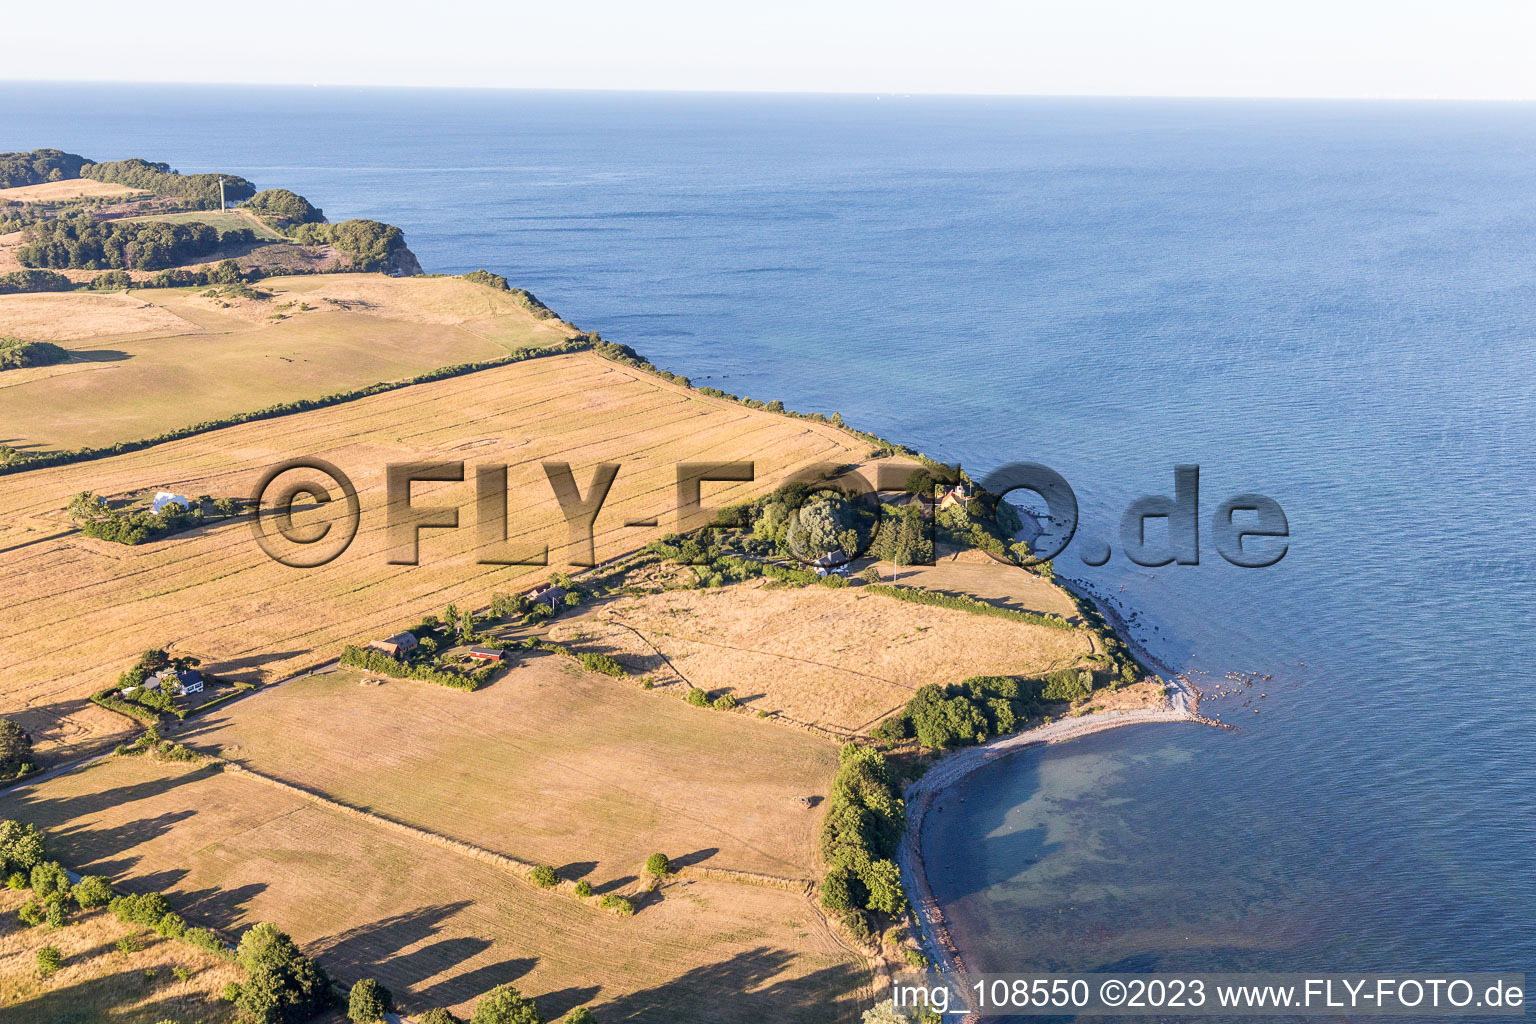 Borre in the state Zealand, Denmark seen from a drone